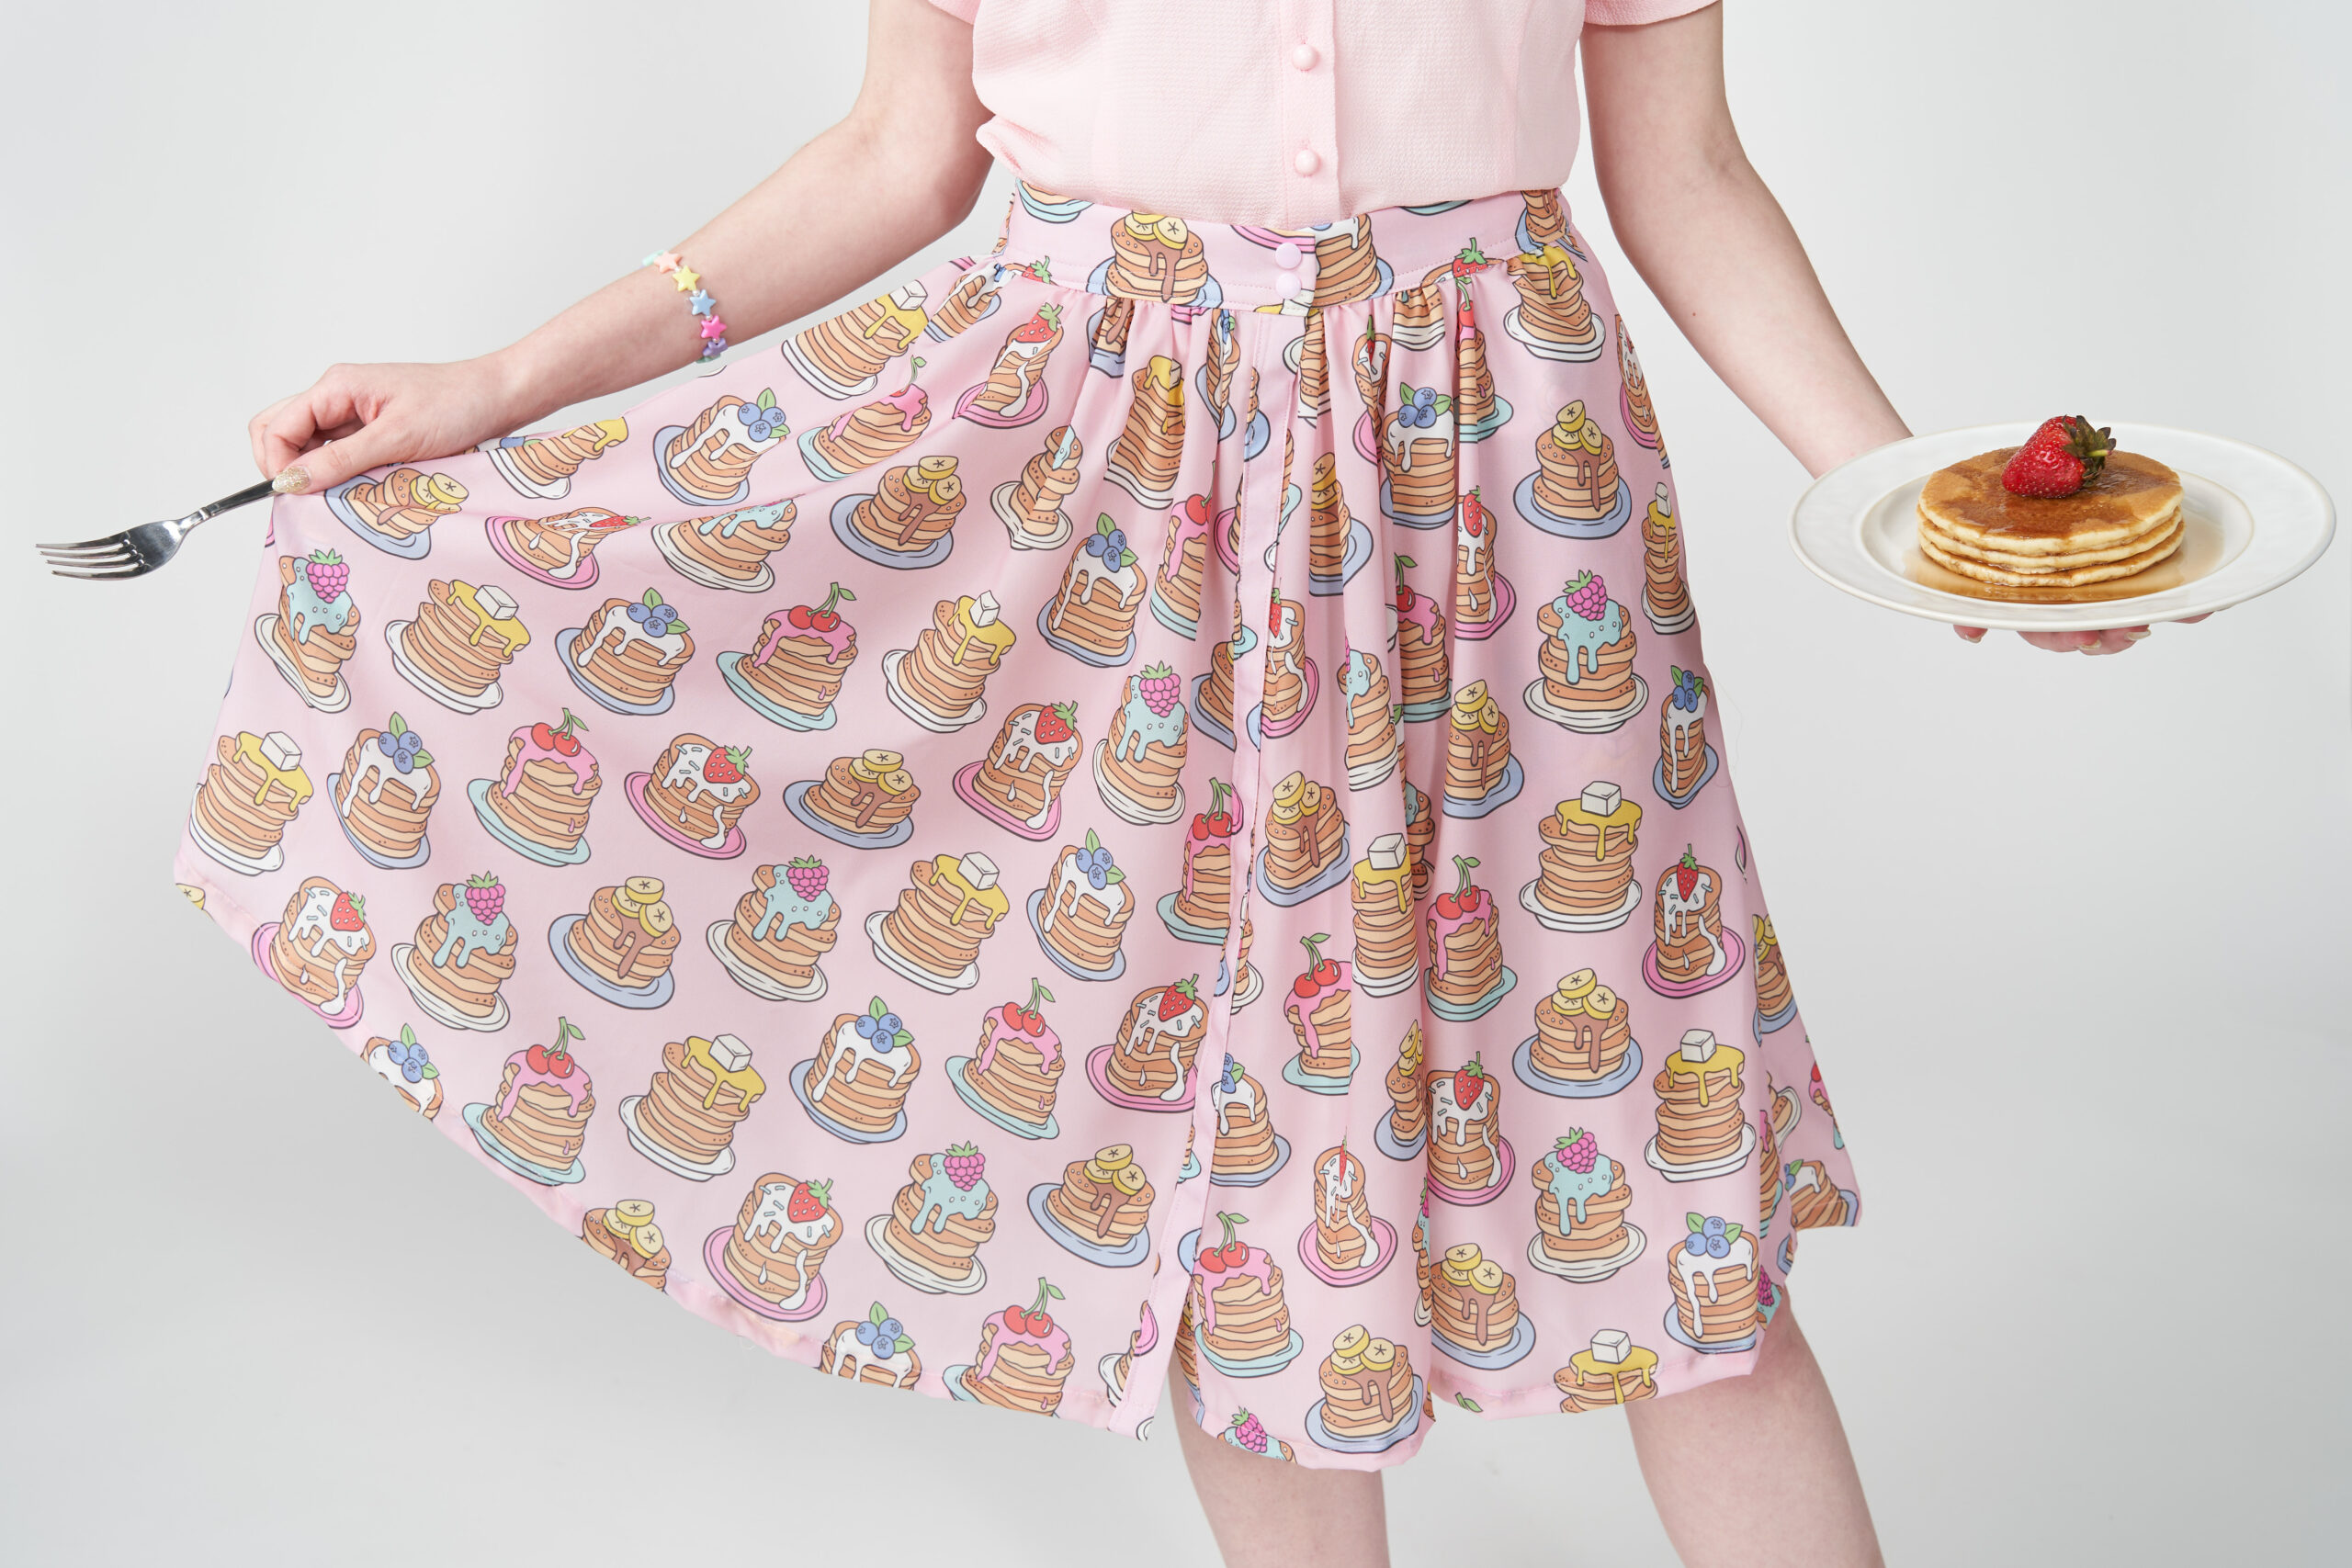 Anna is a white woman with long reddish blonde hair wearing a pink button up blouse and pink pancake button up skirt. She is holding a plate of pancakes with syrup and strawberry.